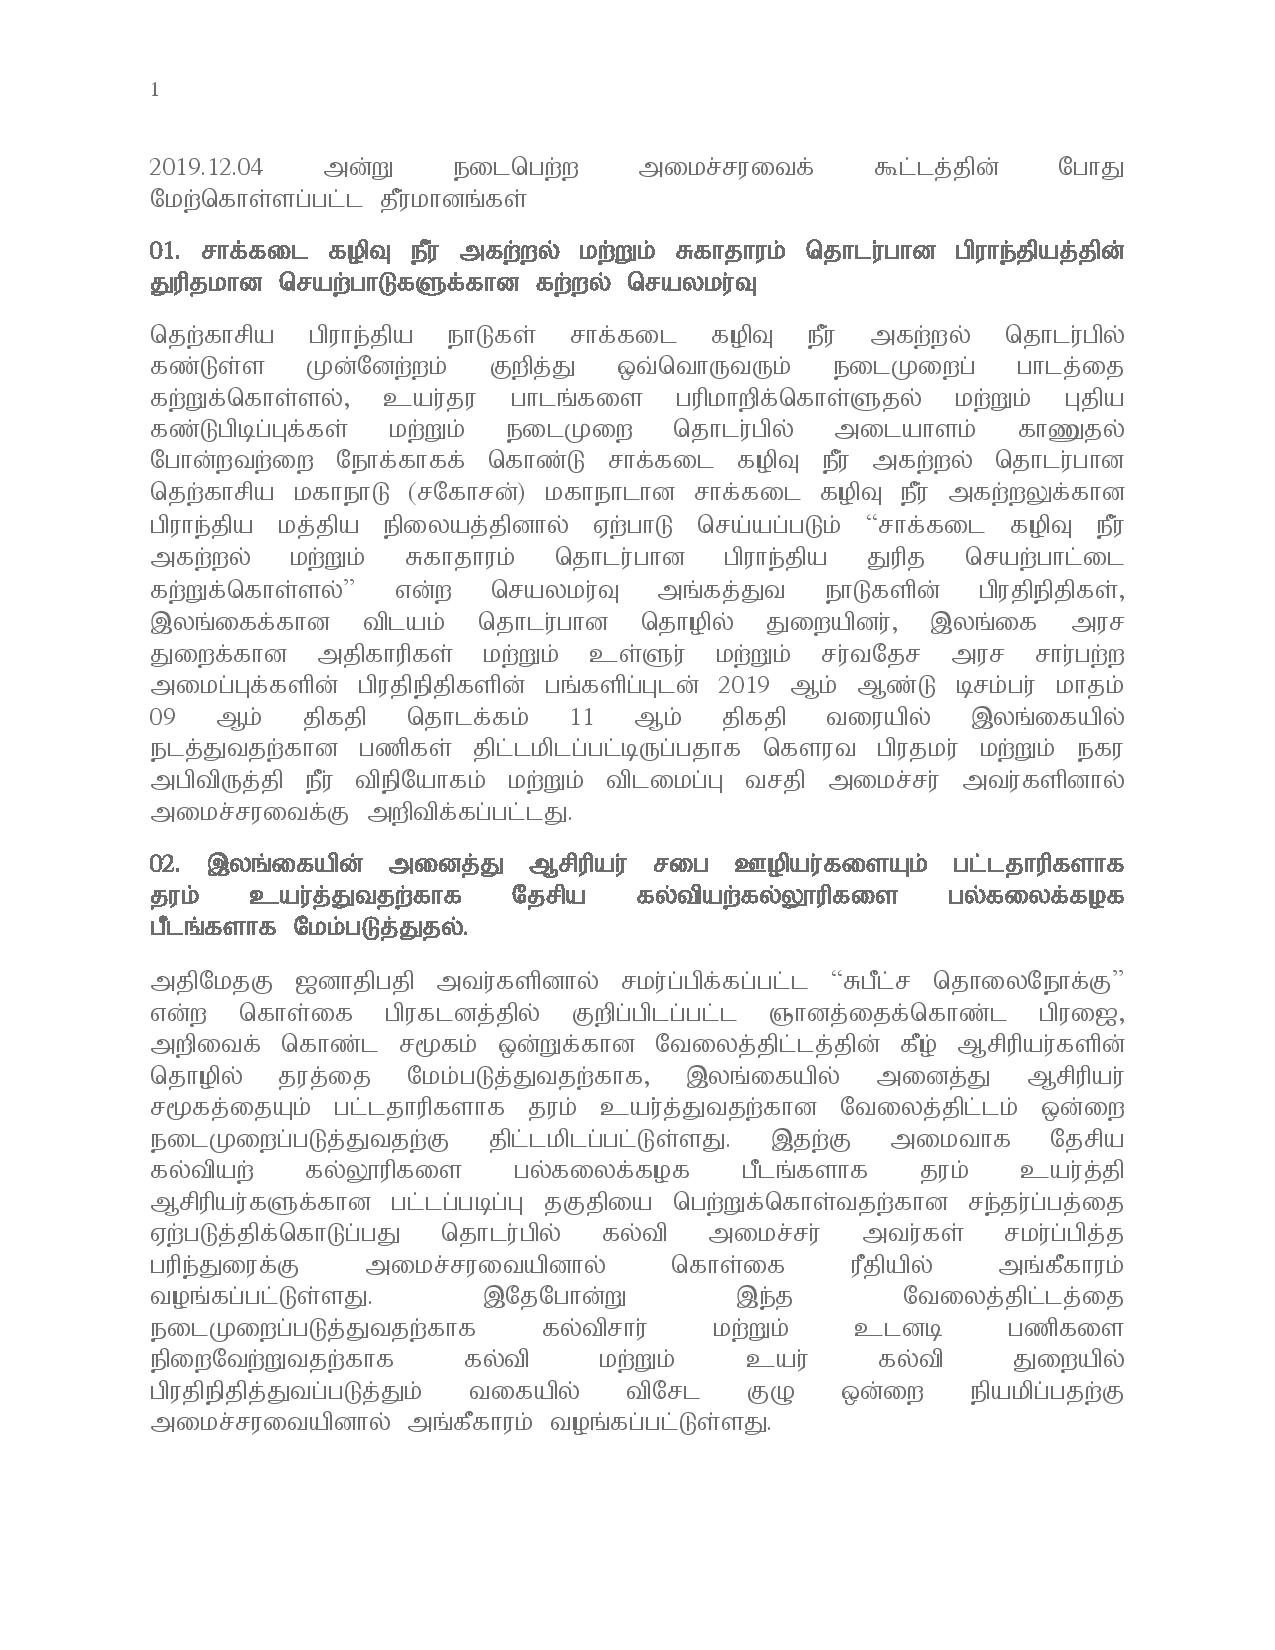 04.12.2019 cabinet. Tamil page 001